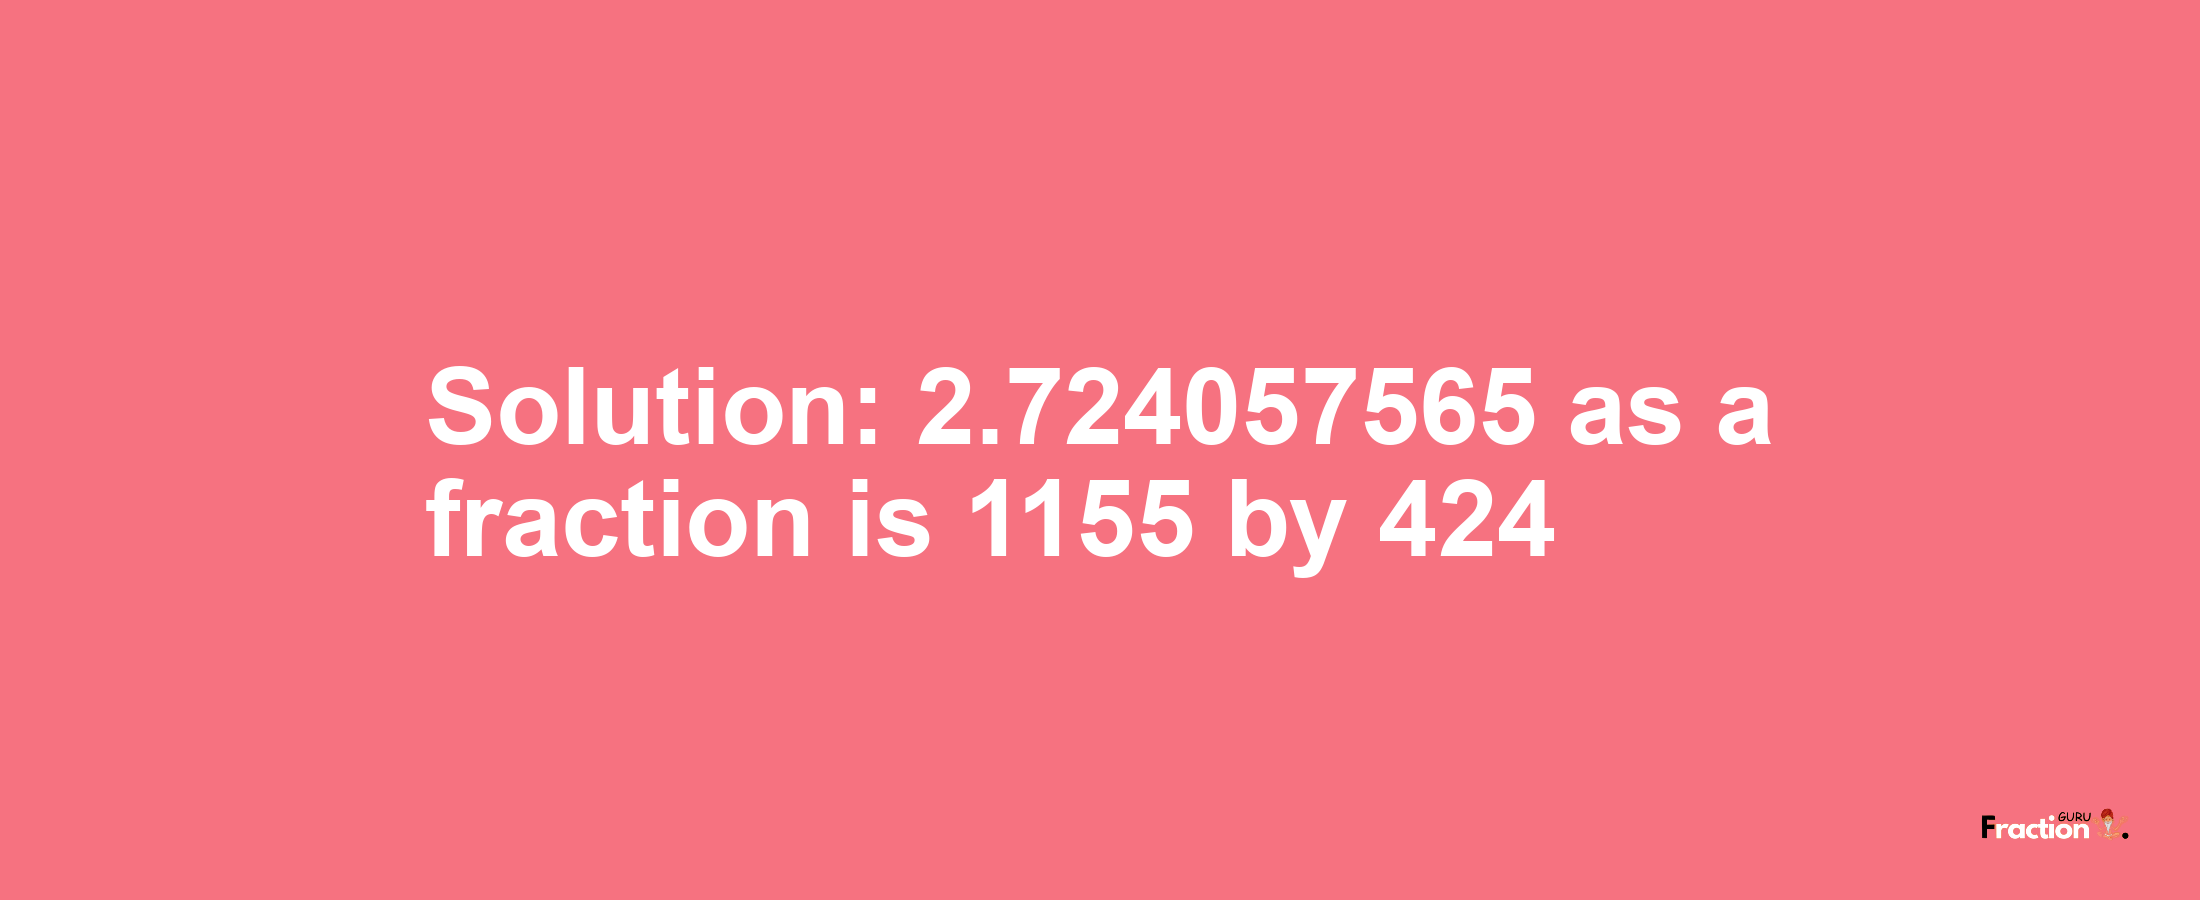 Solution:2.724057565 as a fraction is 1155/424